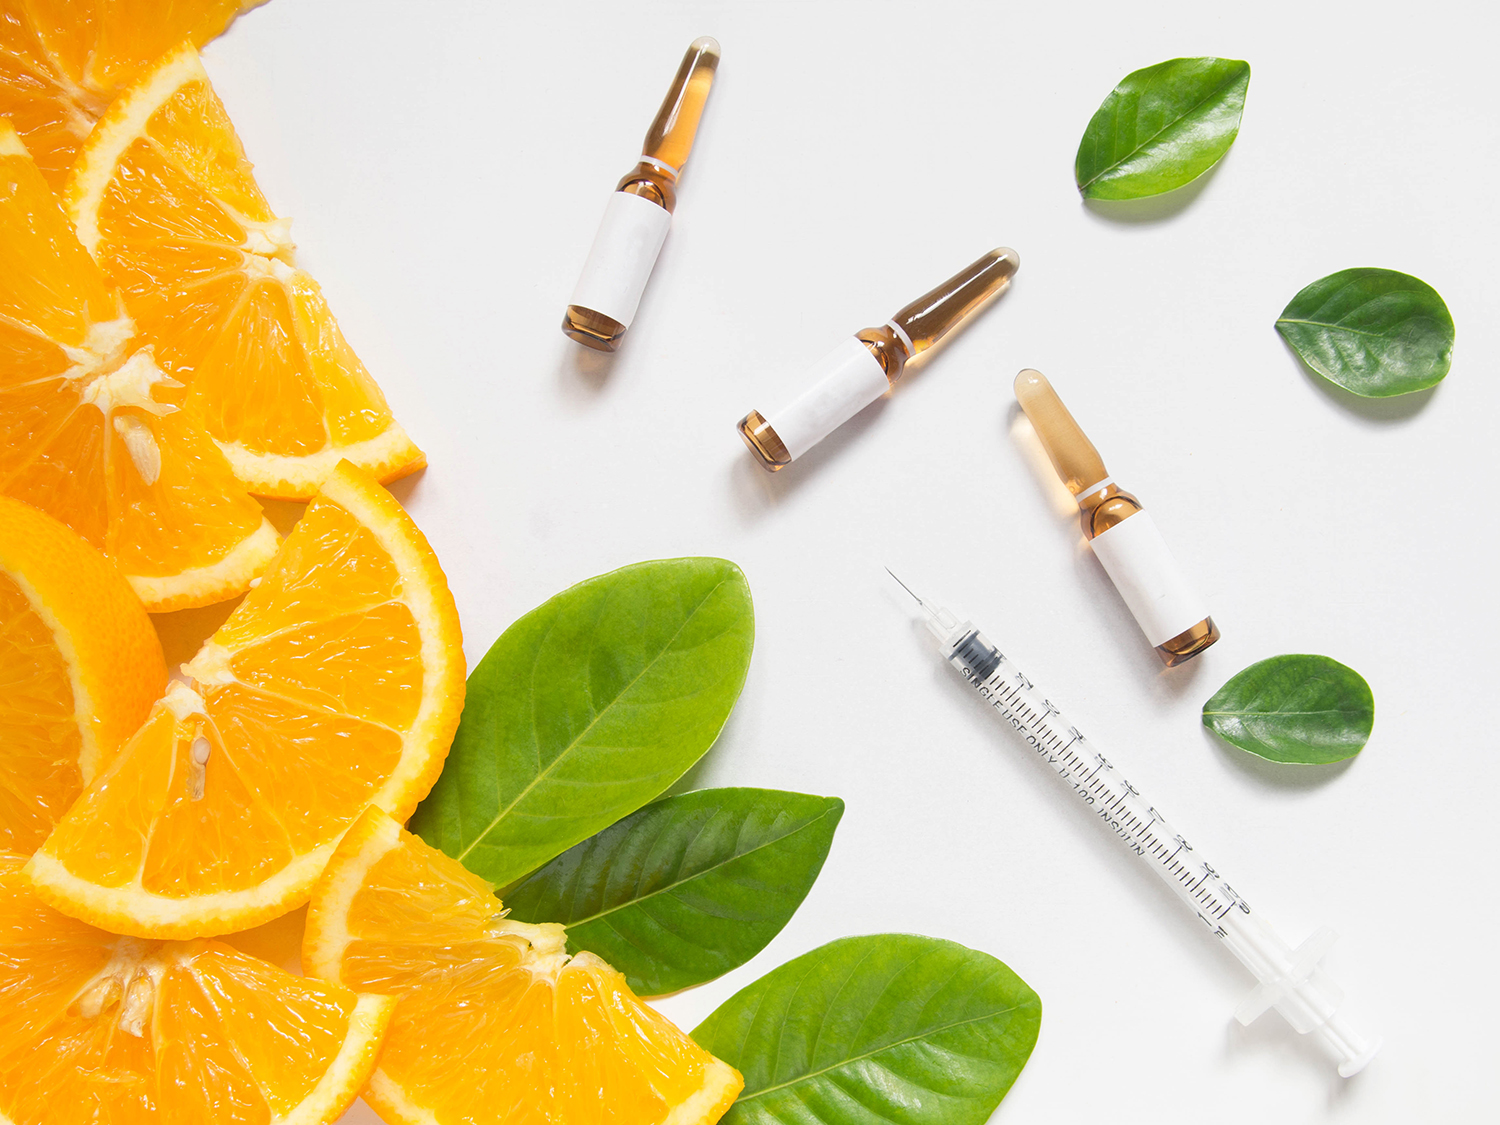 Top view of vitamin C brown ampule for injection and syringe with fresh juicy orange fruit slice and green leaves on white table. Vitamin/mineral supplement concept. Beauty product mock-up.